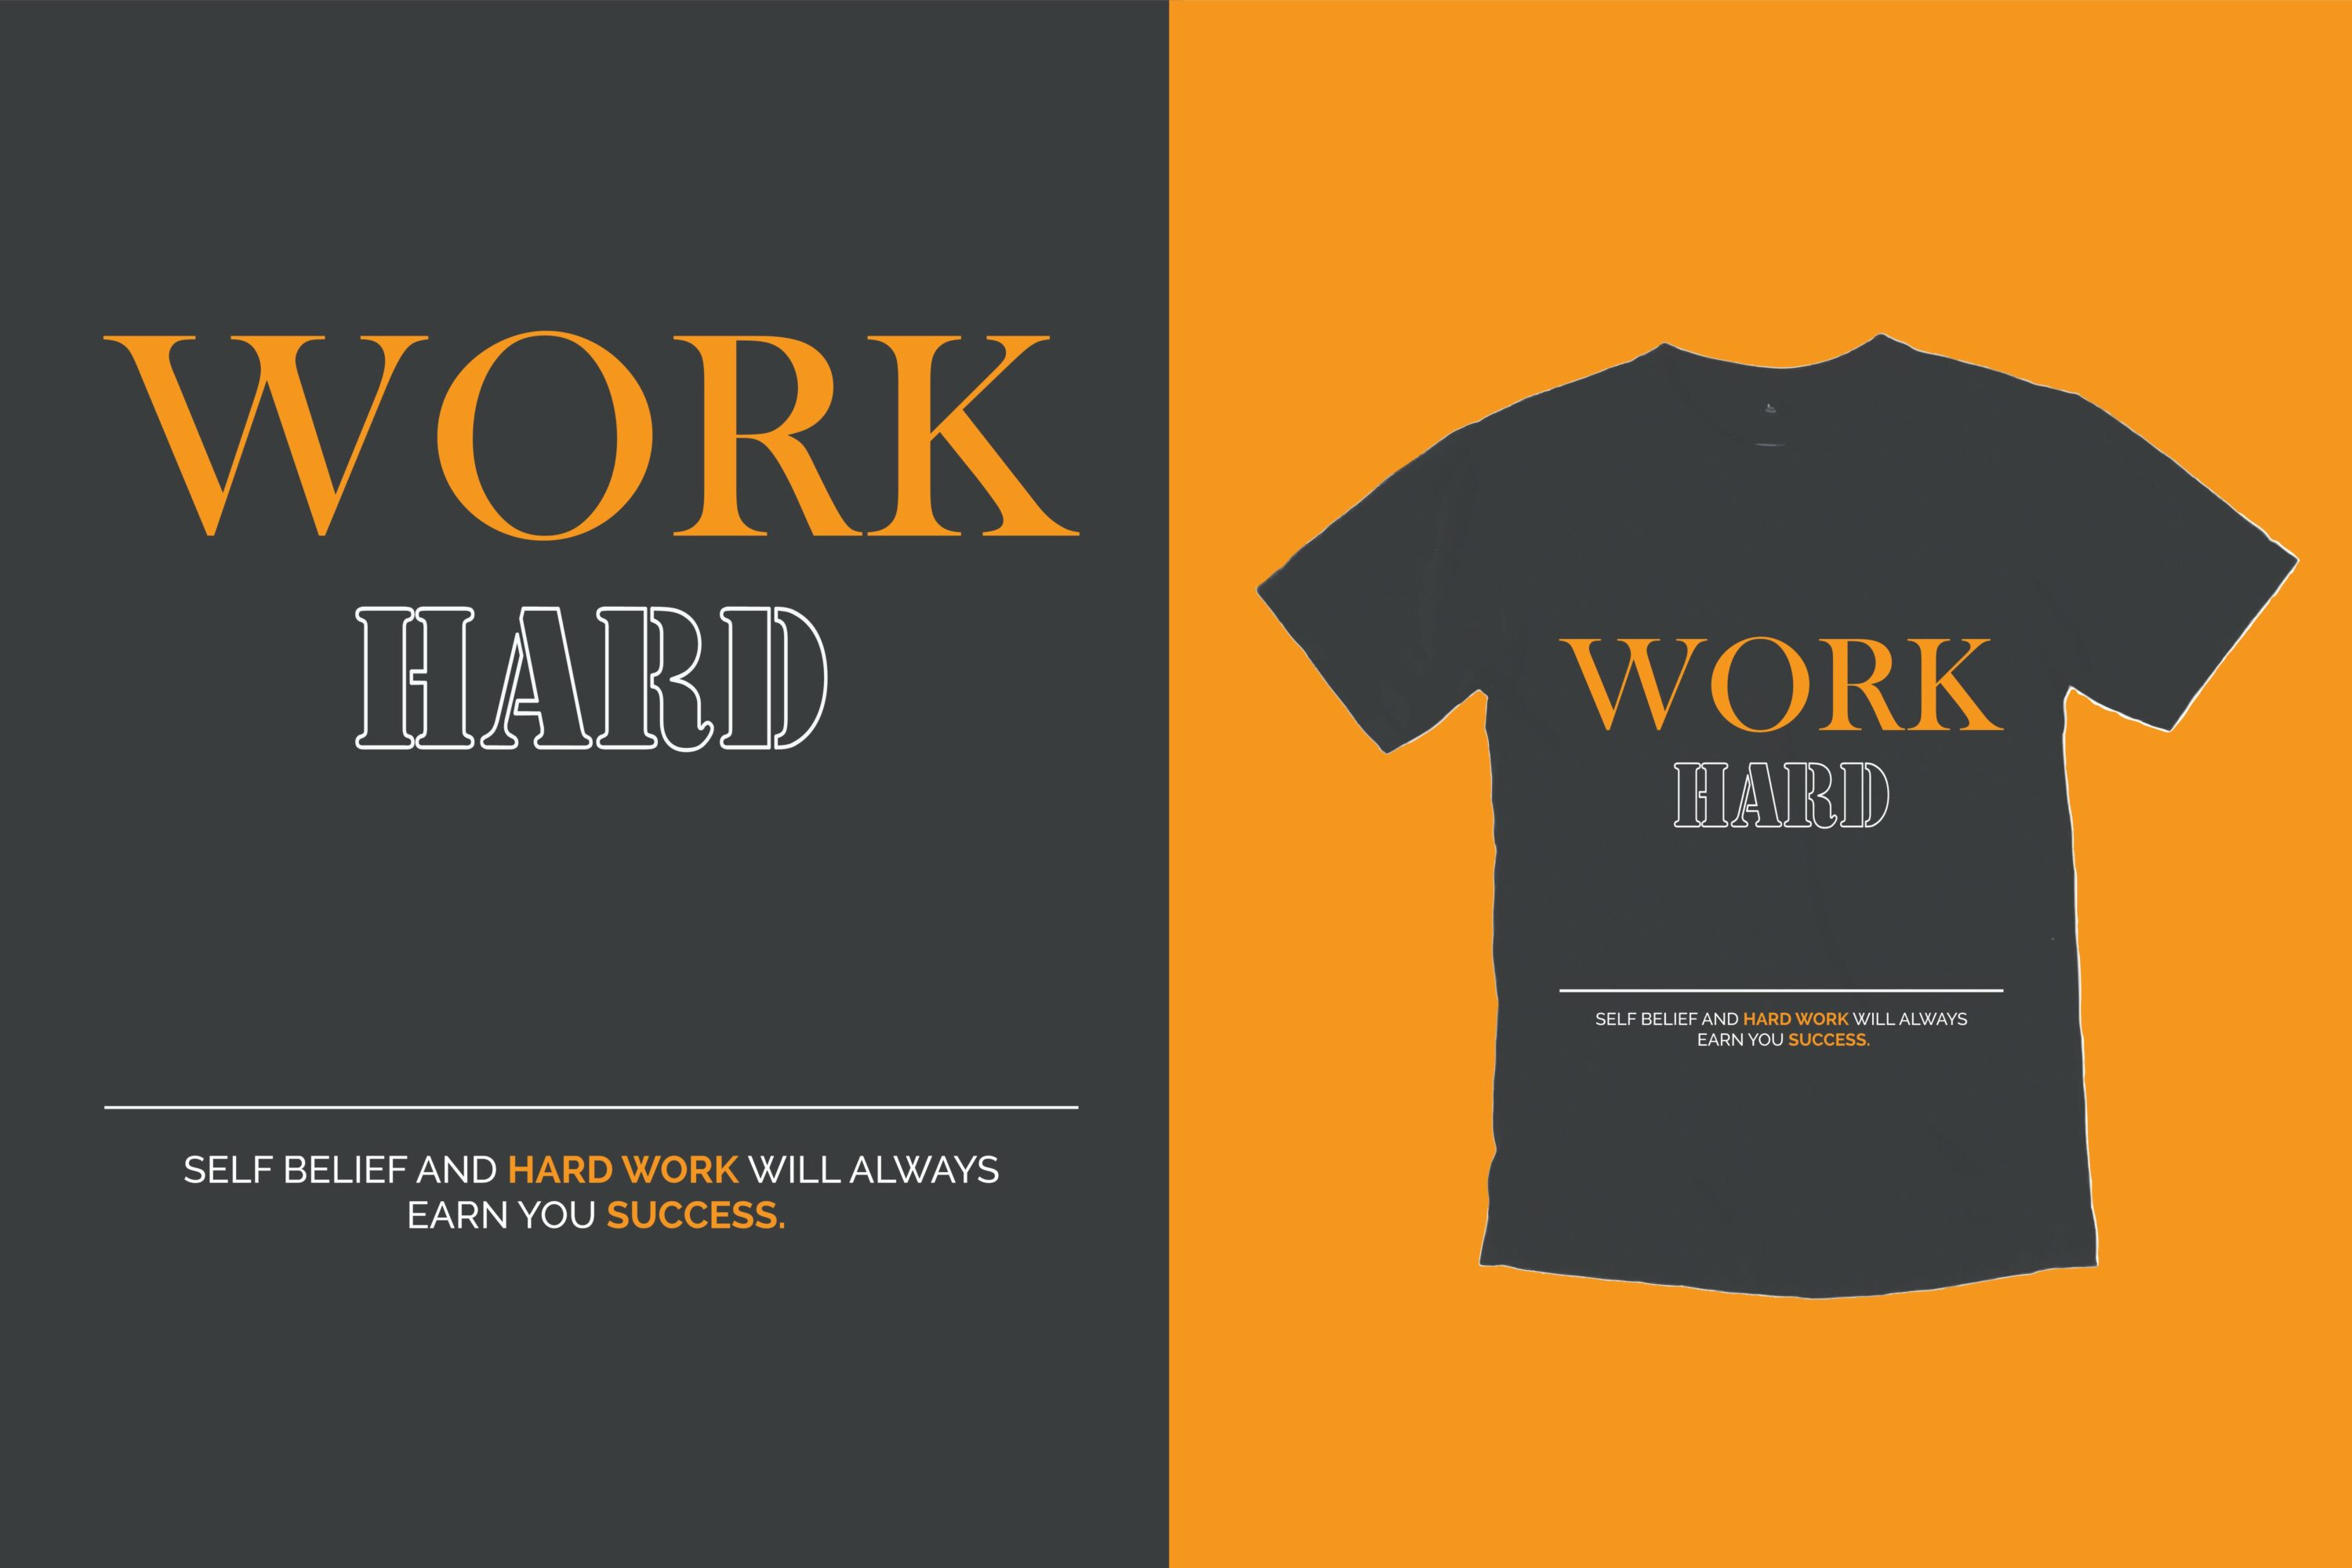 T-shirt Motivational Quotes Typography image.